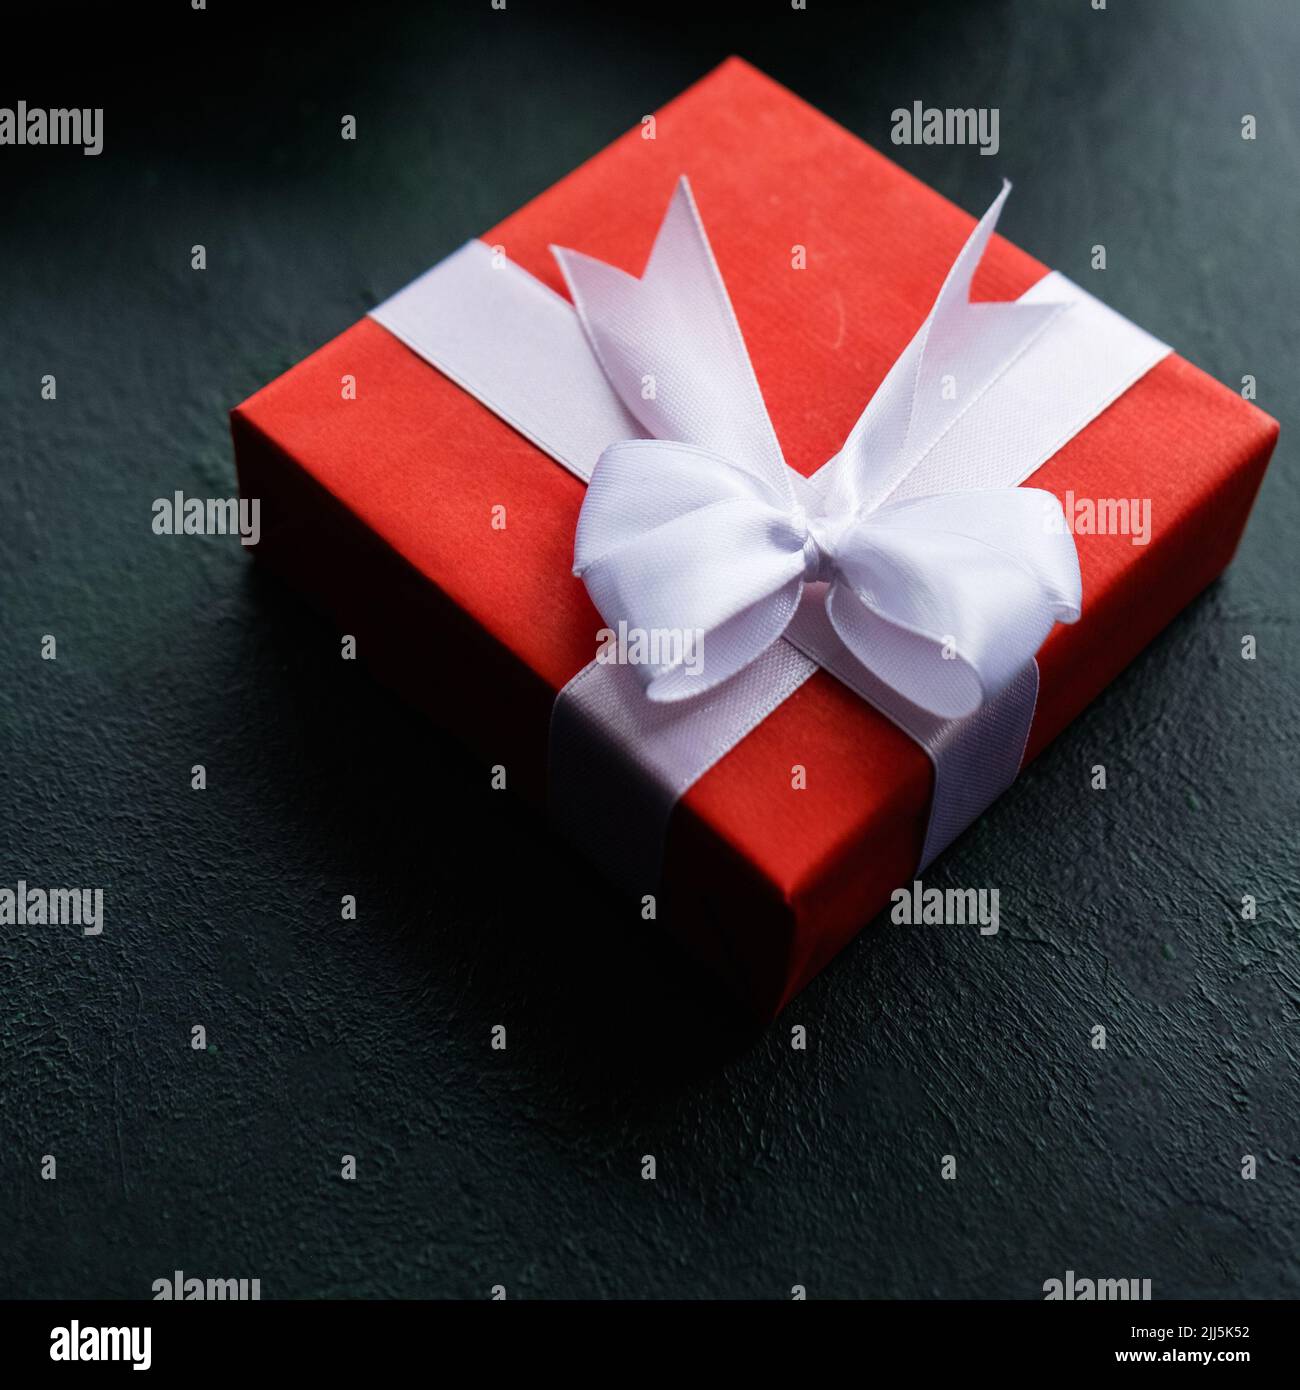 gift box special present love affection Stock Photo